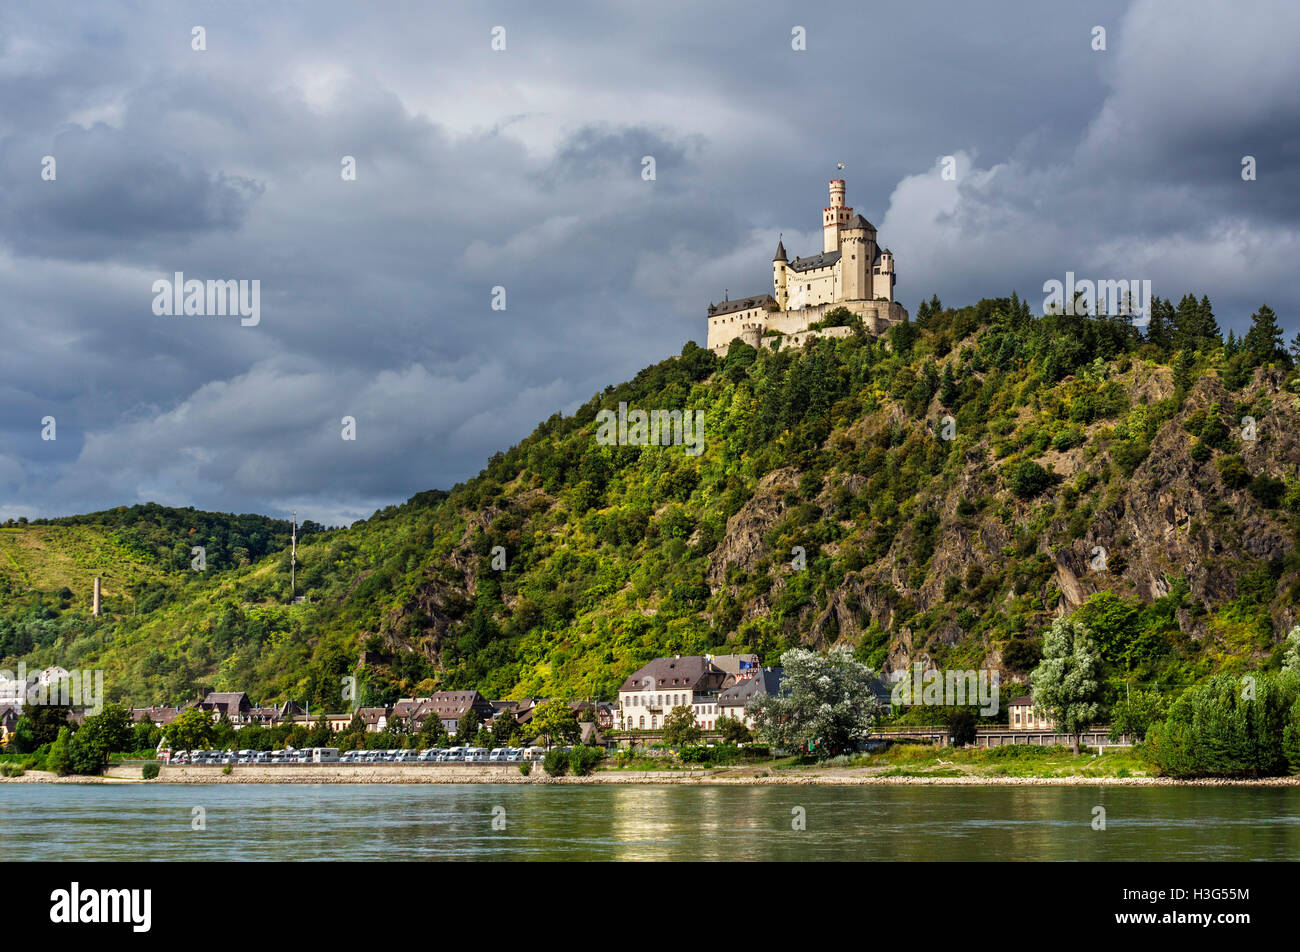 The Marksburg Castle on the River Rhine viewed from Braubach, Rhine Valley, Rhineland-Palatinate, Germany Stock Photo